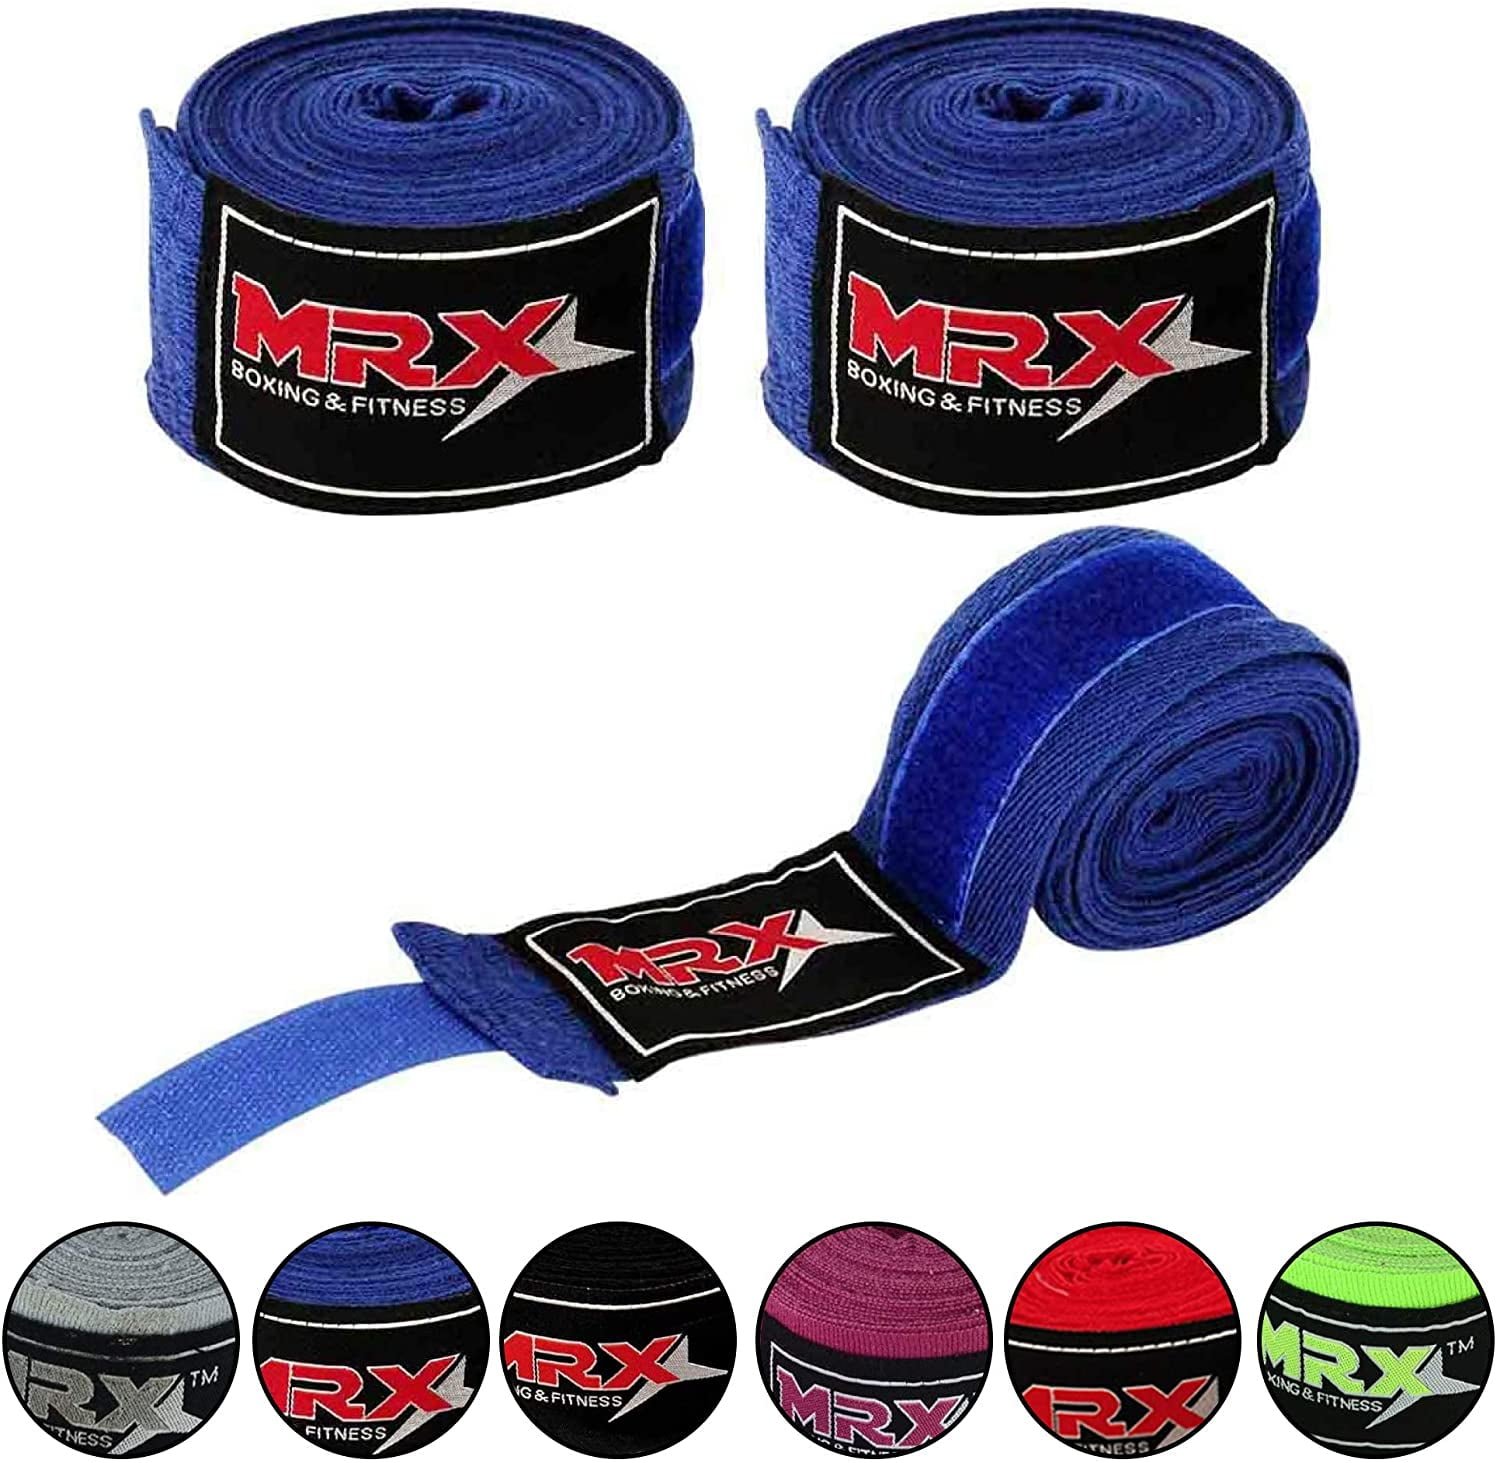 Details about   Boxing Hand Wraps Elasticated Inner Gloves MMA Muay Thai Kickboxing Bandages 